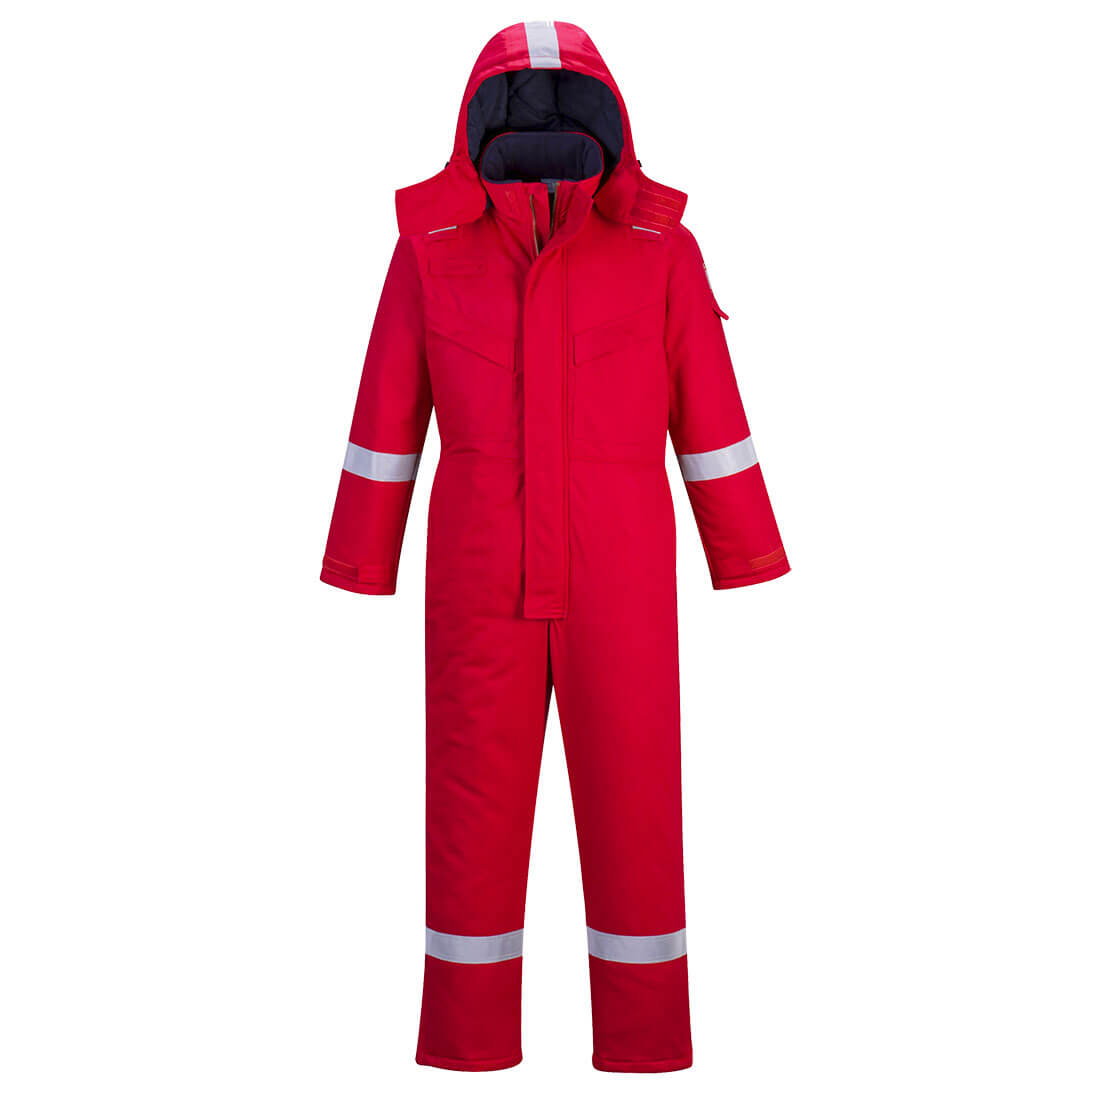 Image of Biz Flame Mens Flame Resistant Antistatic Winter Overall Red XL 32"